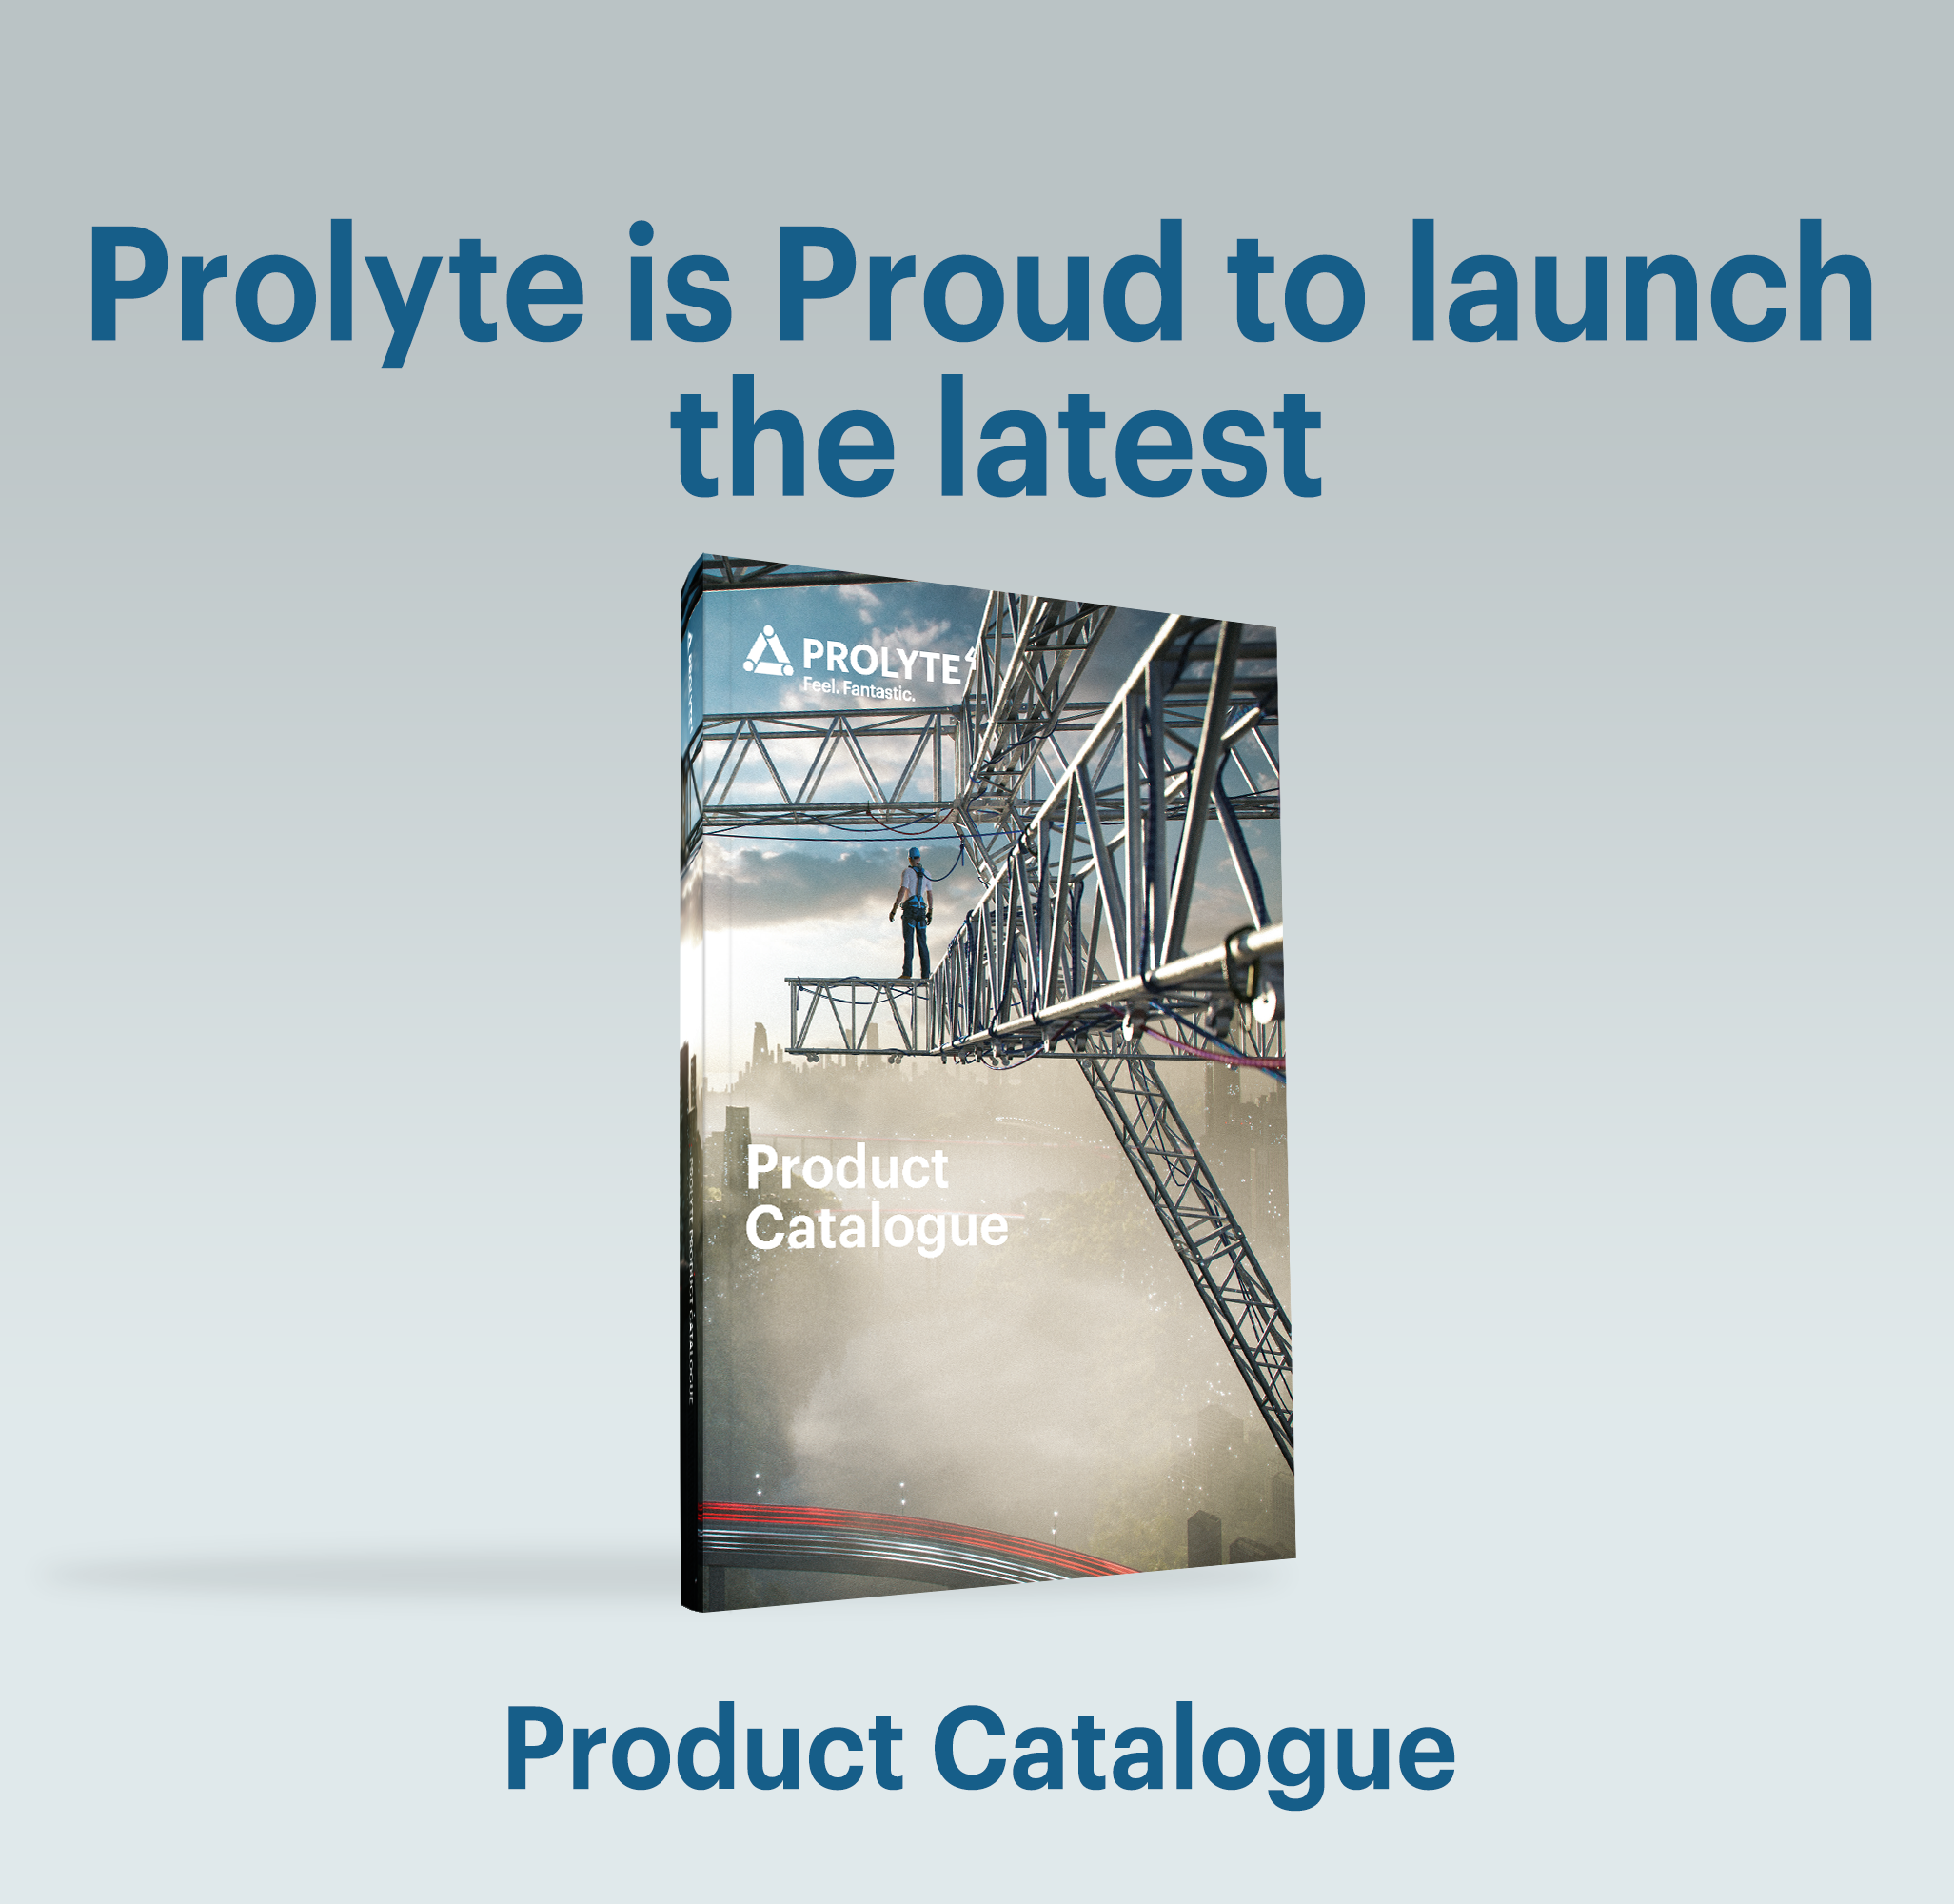 Prolyte's Latest Product Catalogue is here!